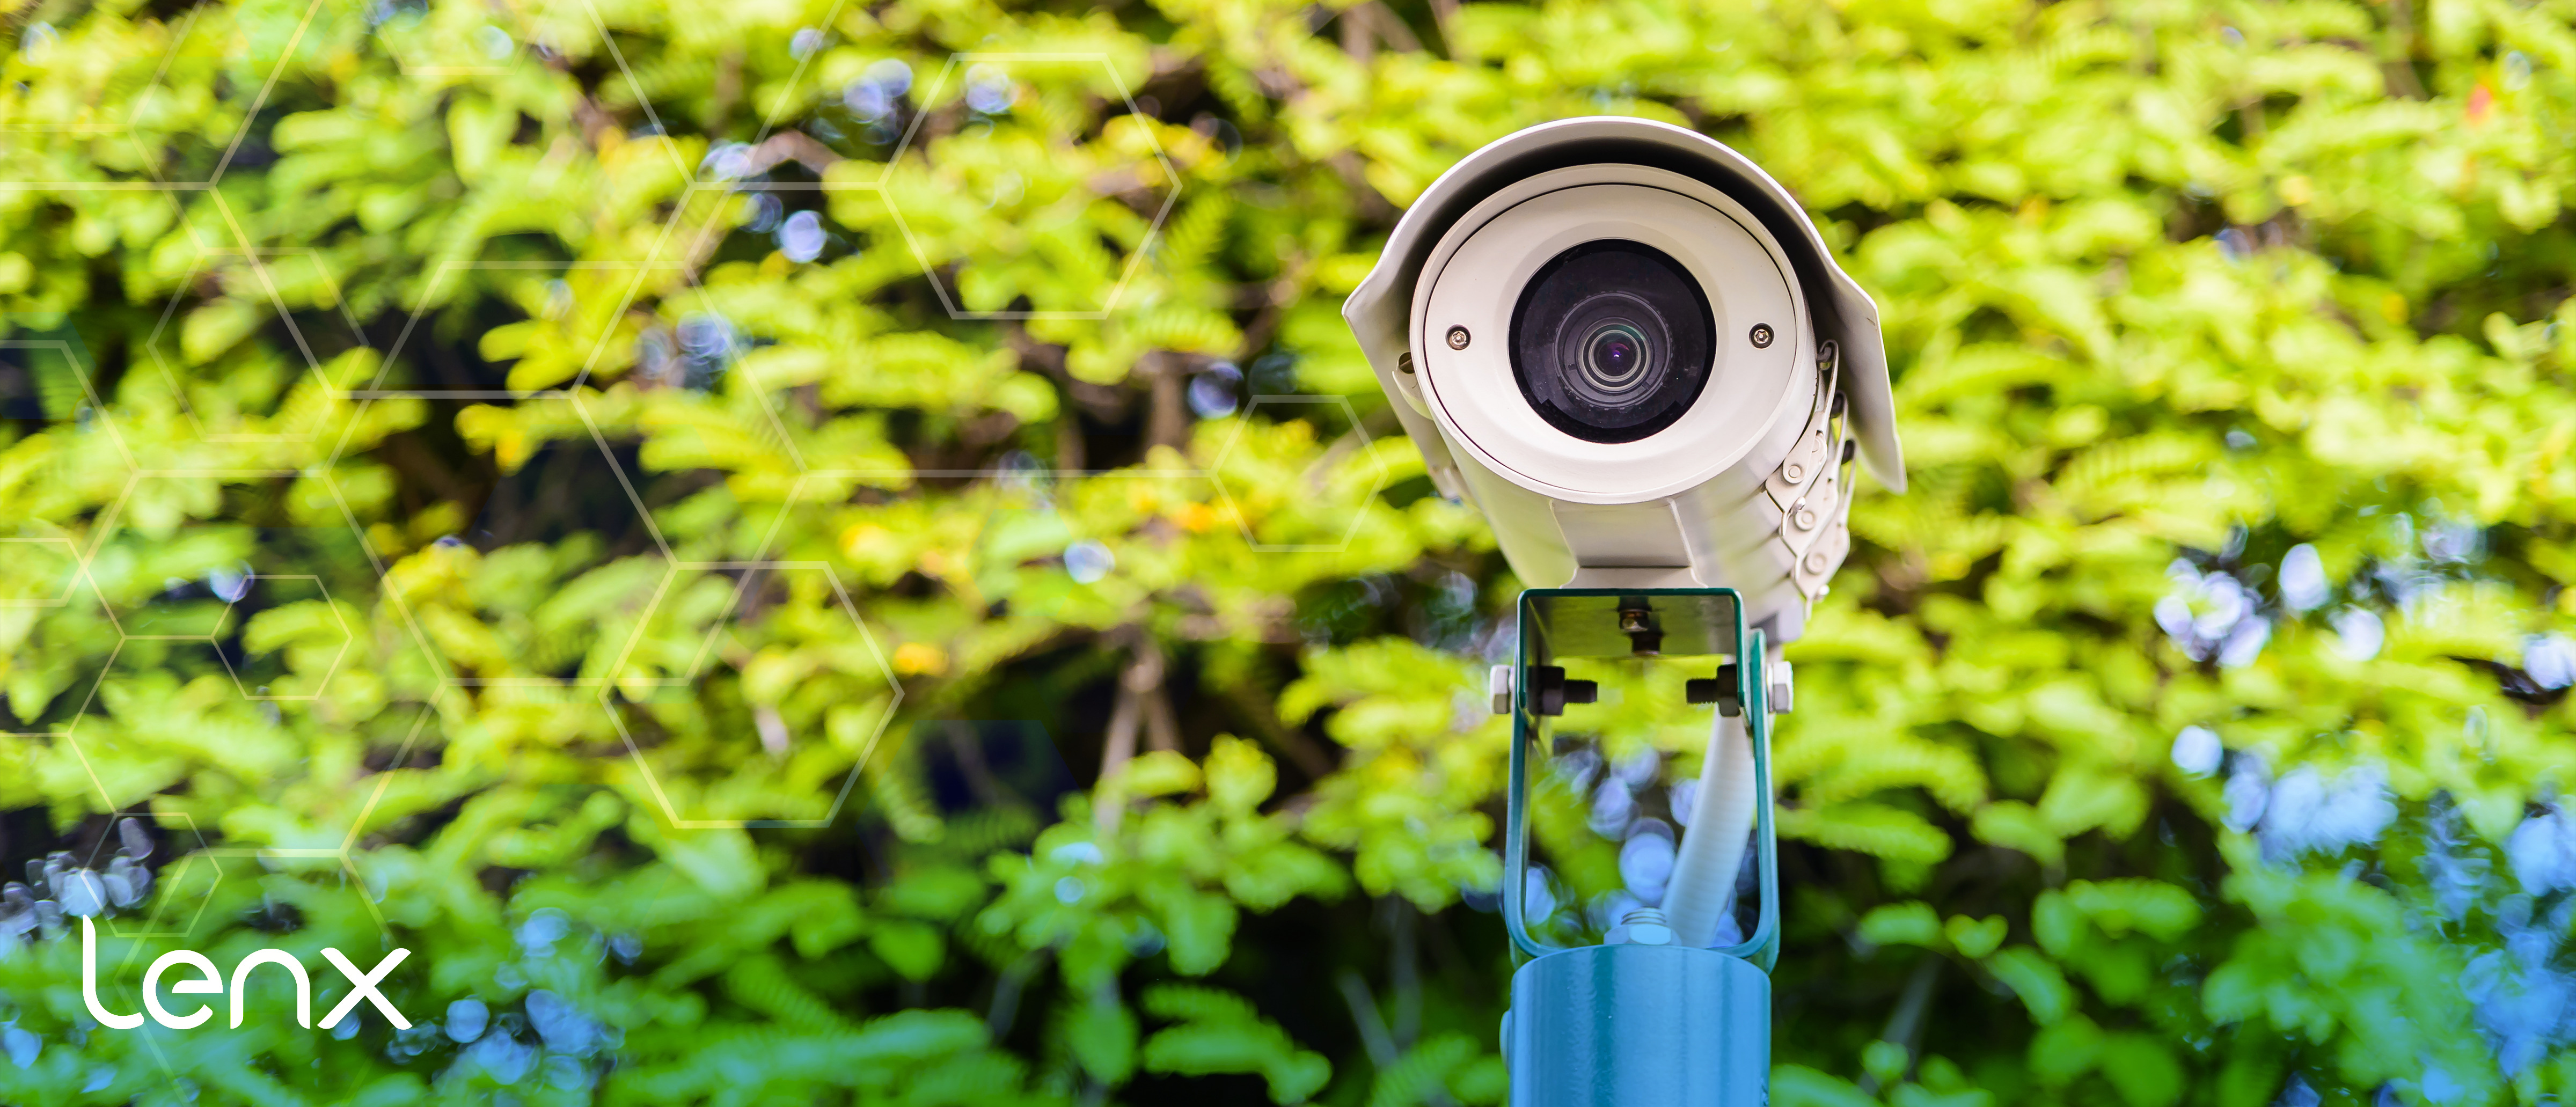 Protecting Outdoor School Areas With AI Security, Active Shooter Detection